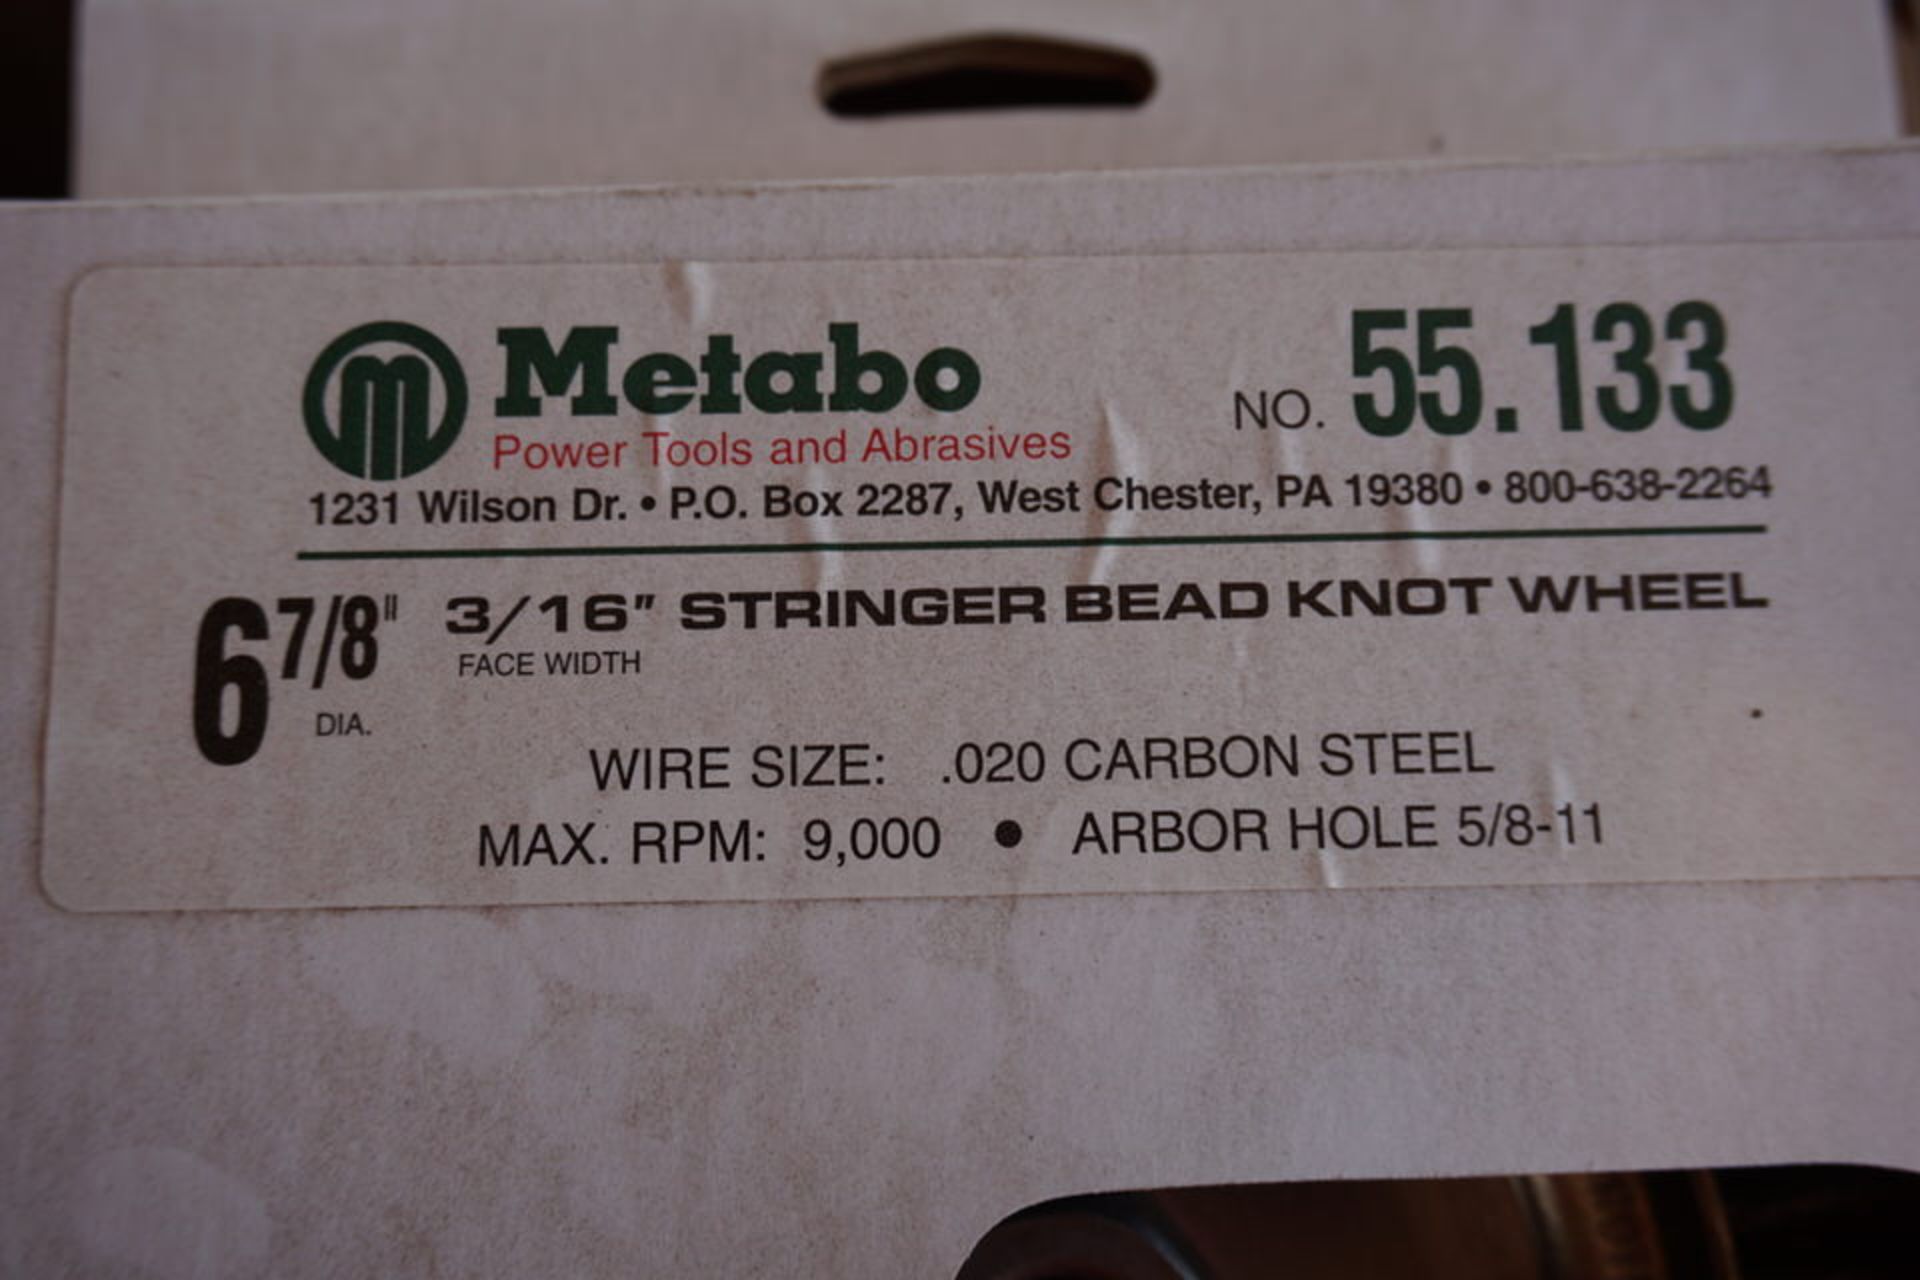 METABO 6 7/8" WIRE KNOT BRUSHE S (37) CASES - Image 3 of 3